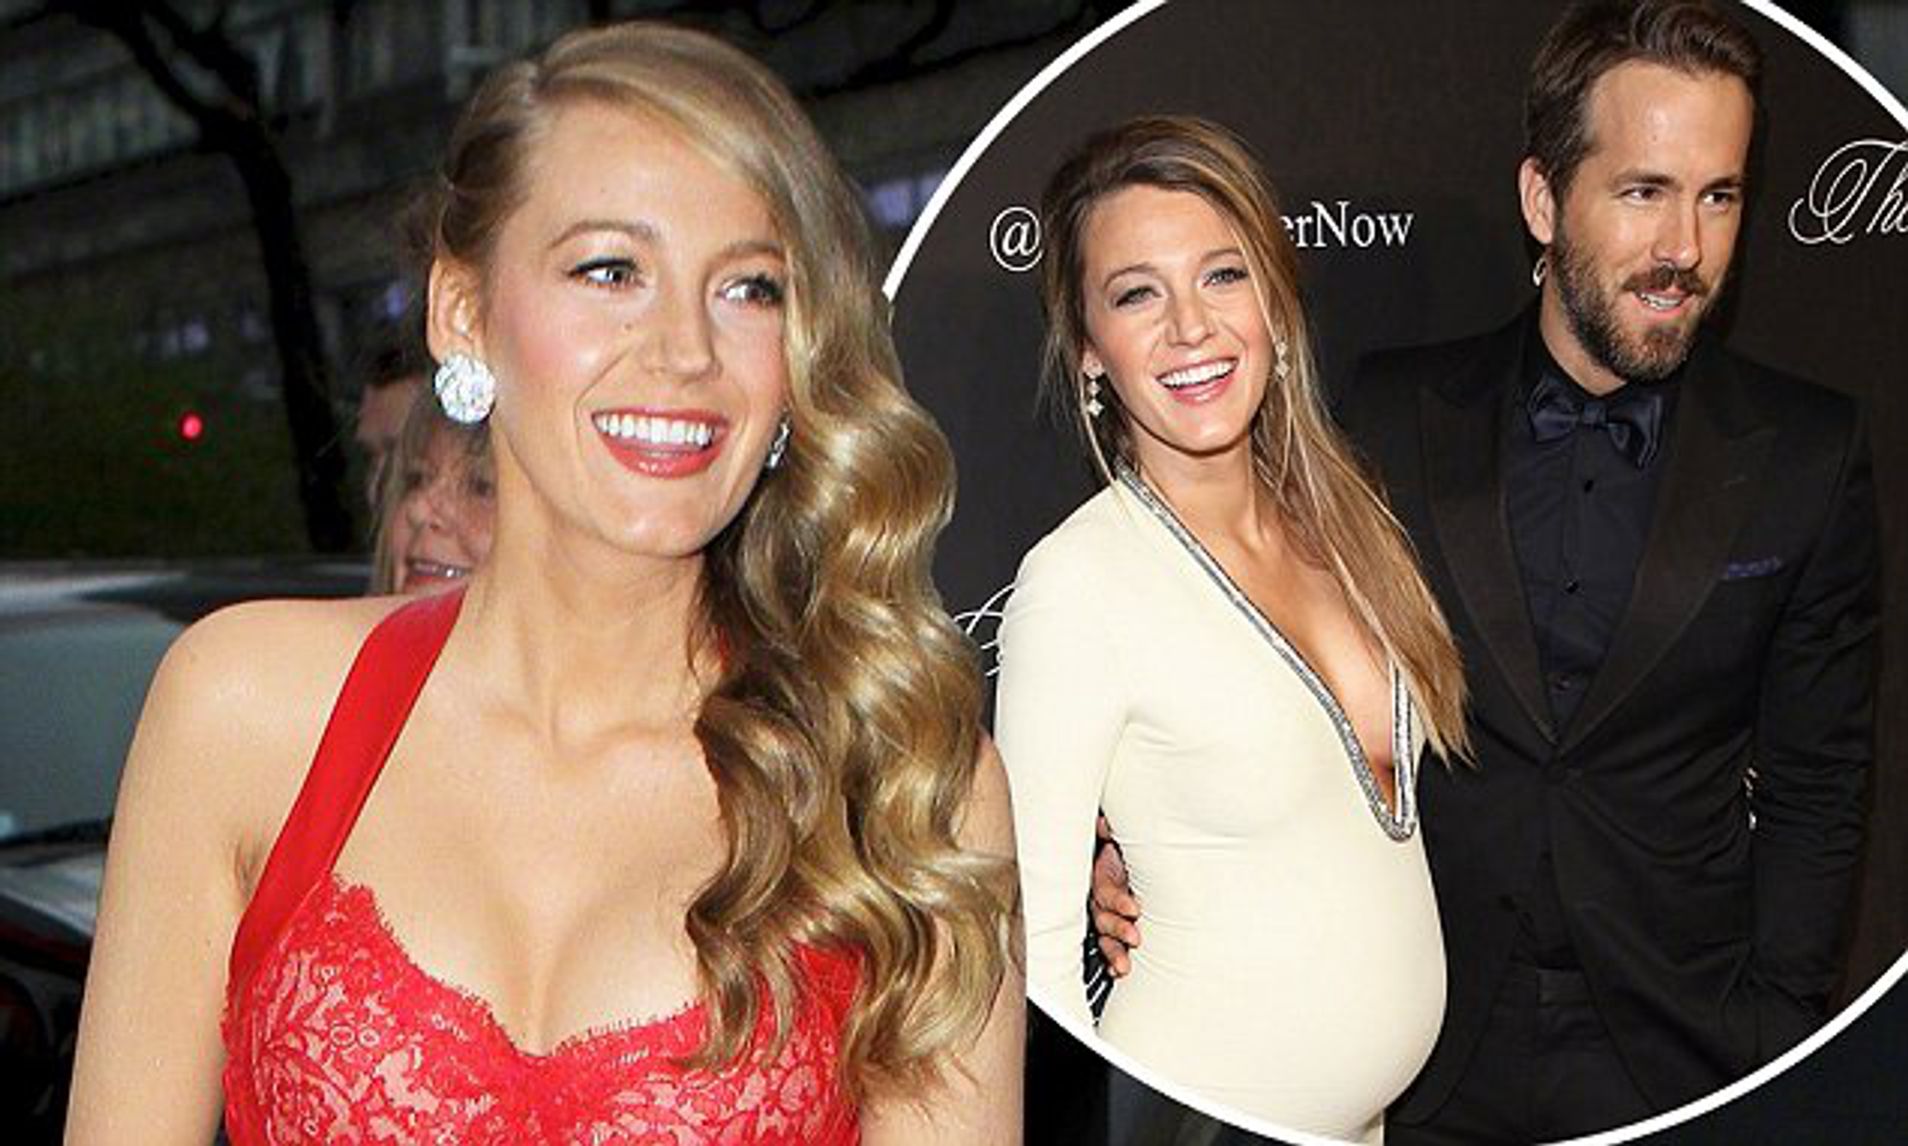 curtis riess recommends blake lively fake tits pic